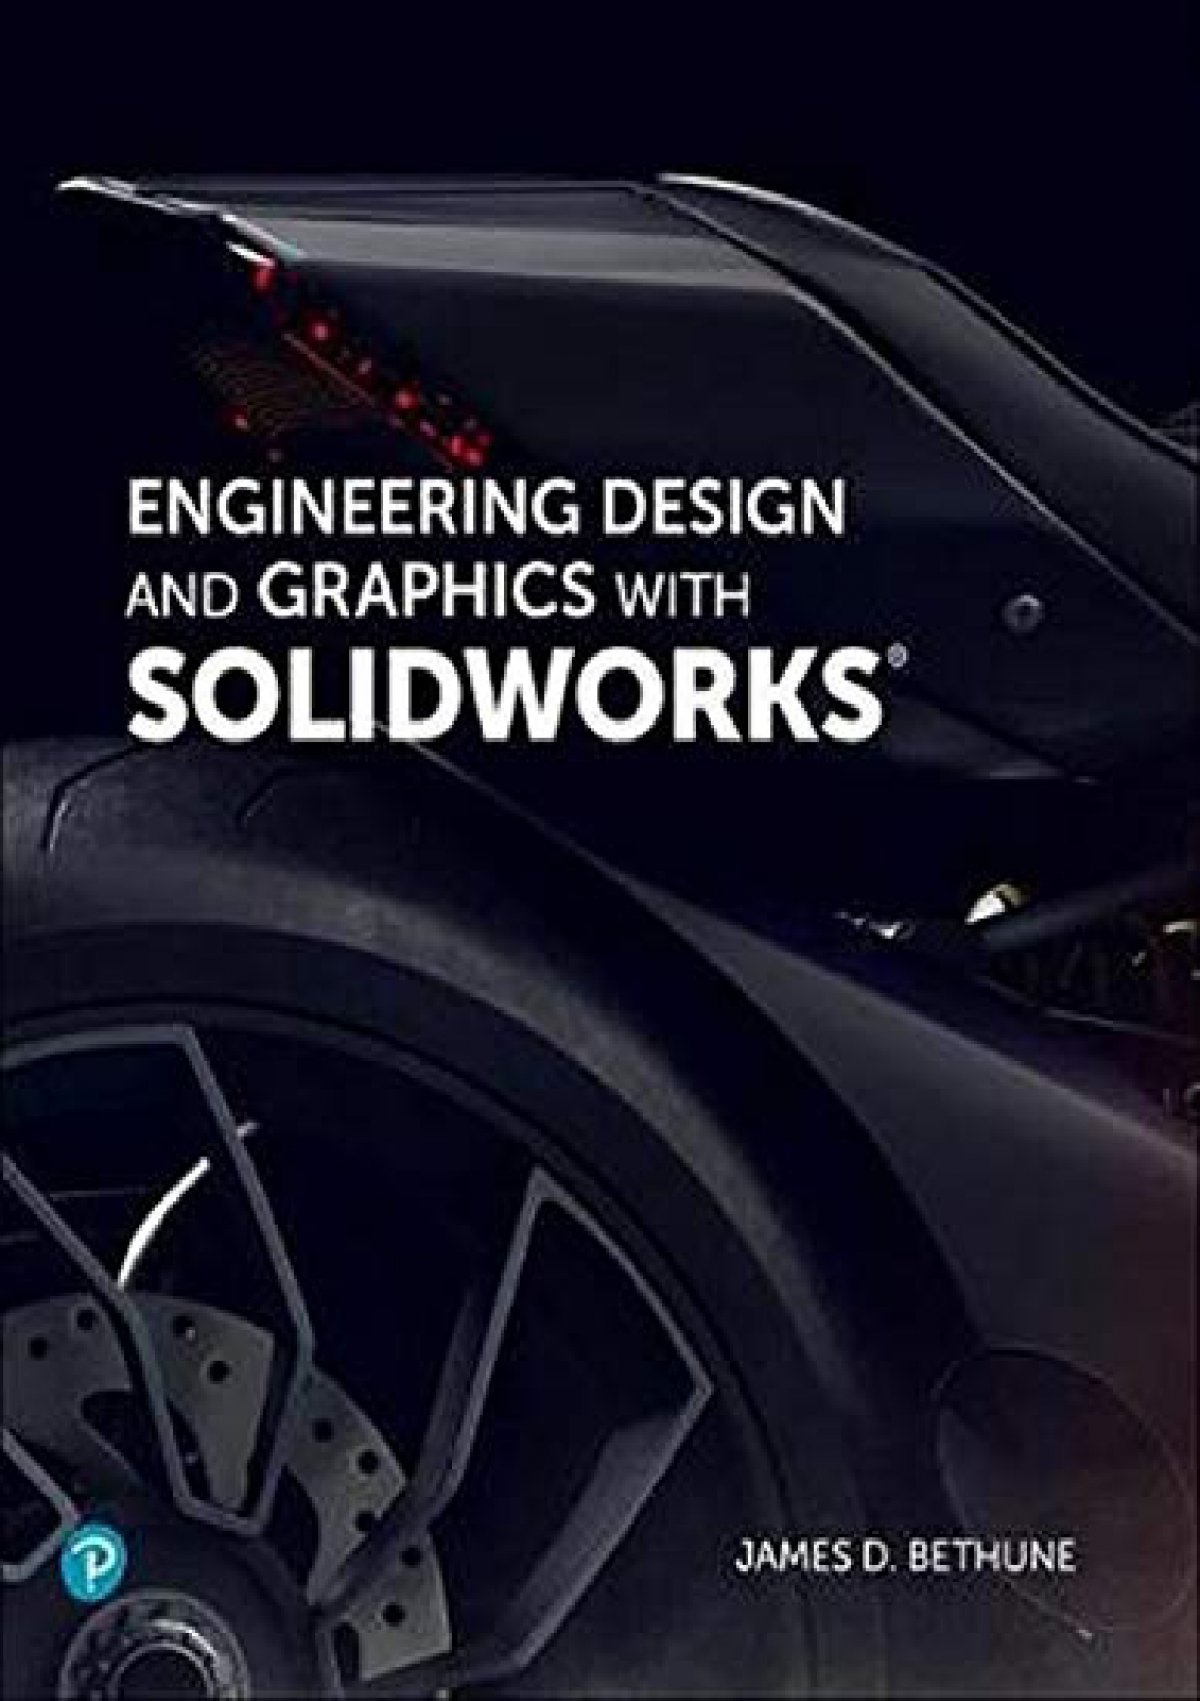 engineering design and graphics with solidworks 2019 pdf download